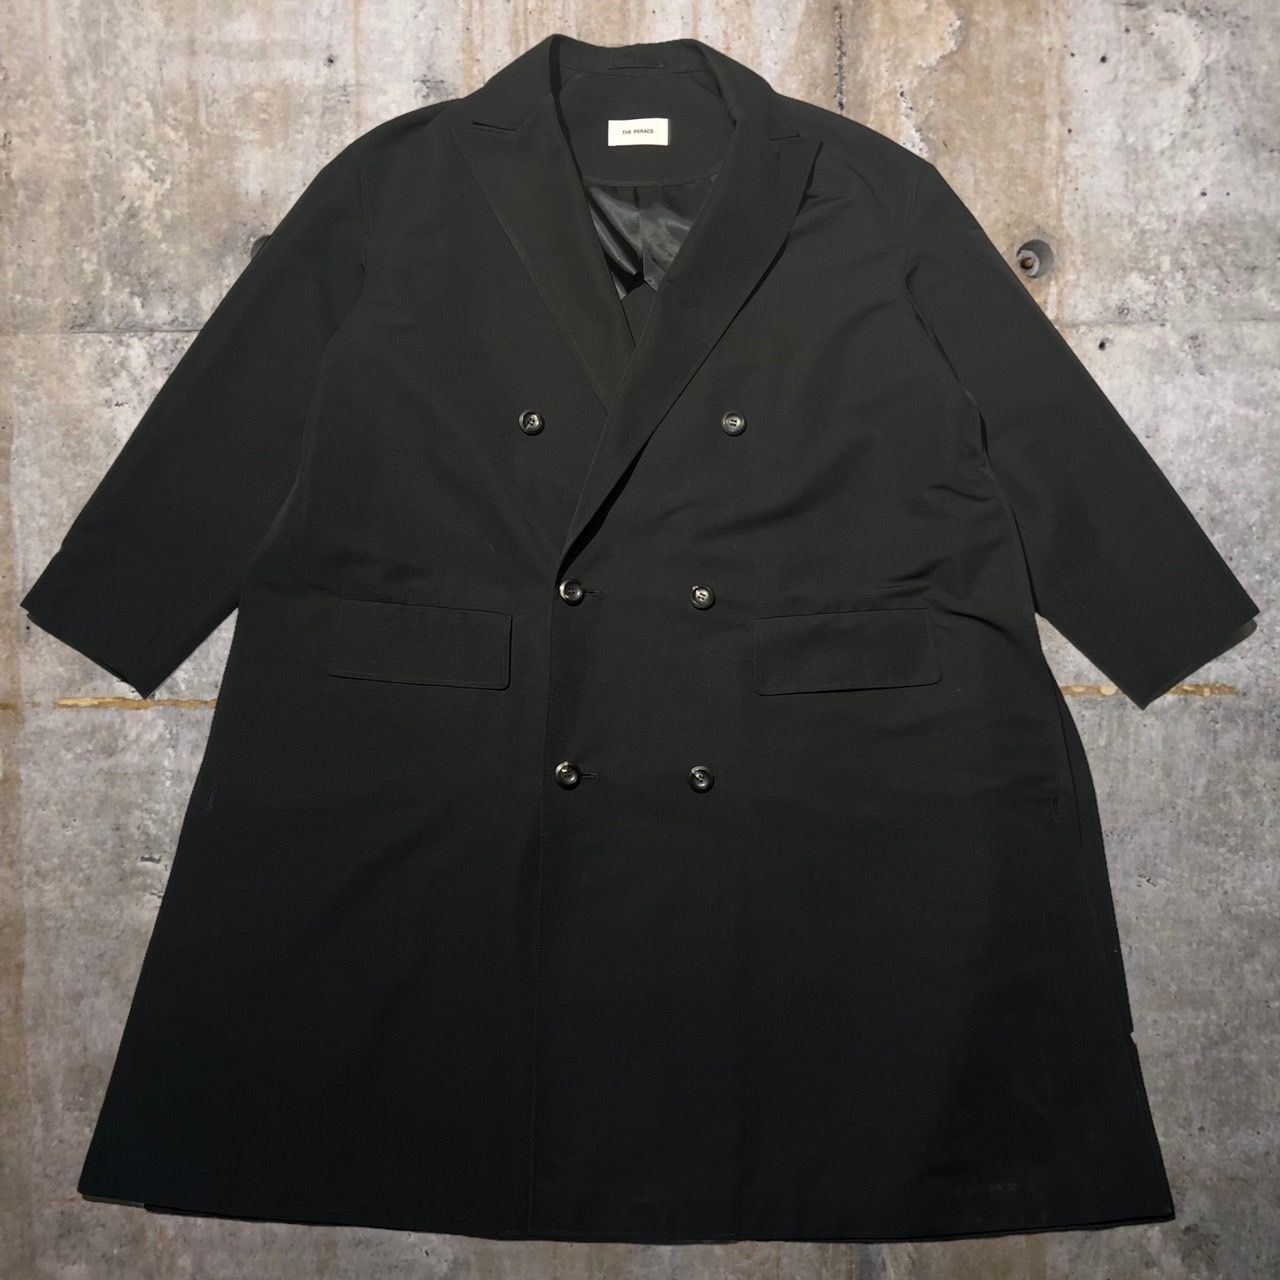 THE RERACS(ザリラクス) 22SS PEAKED LAPEL DOUBLE BREASTED COAT